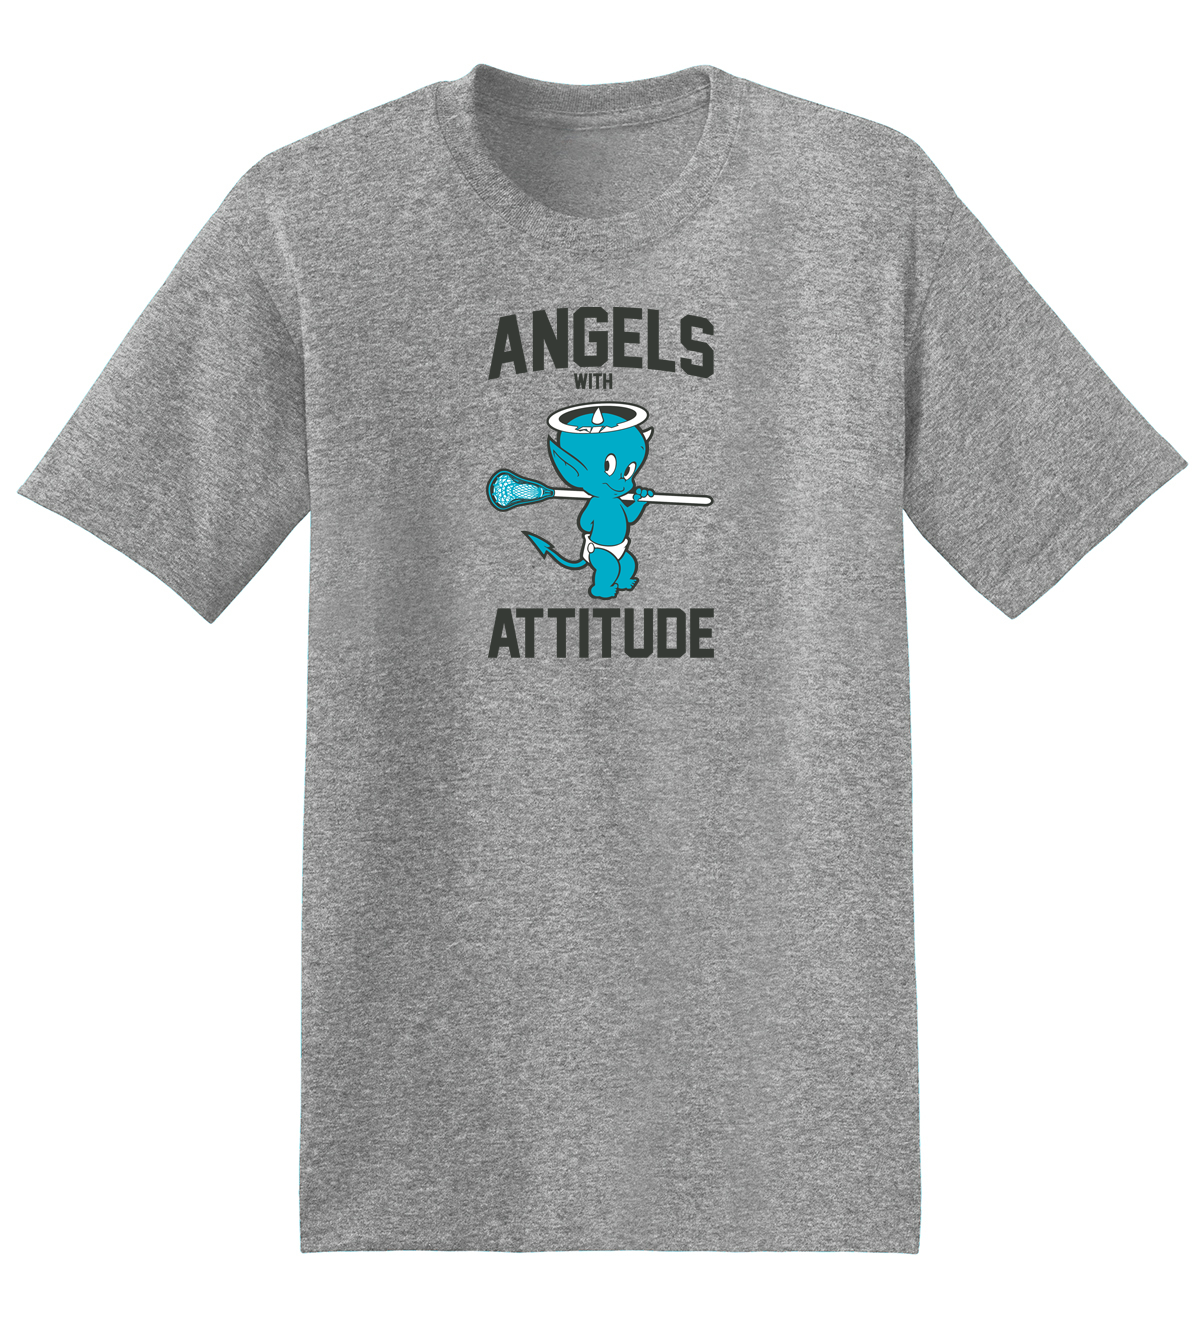 Angels With Attitude Grey T-Shirt